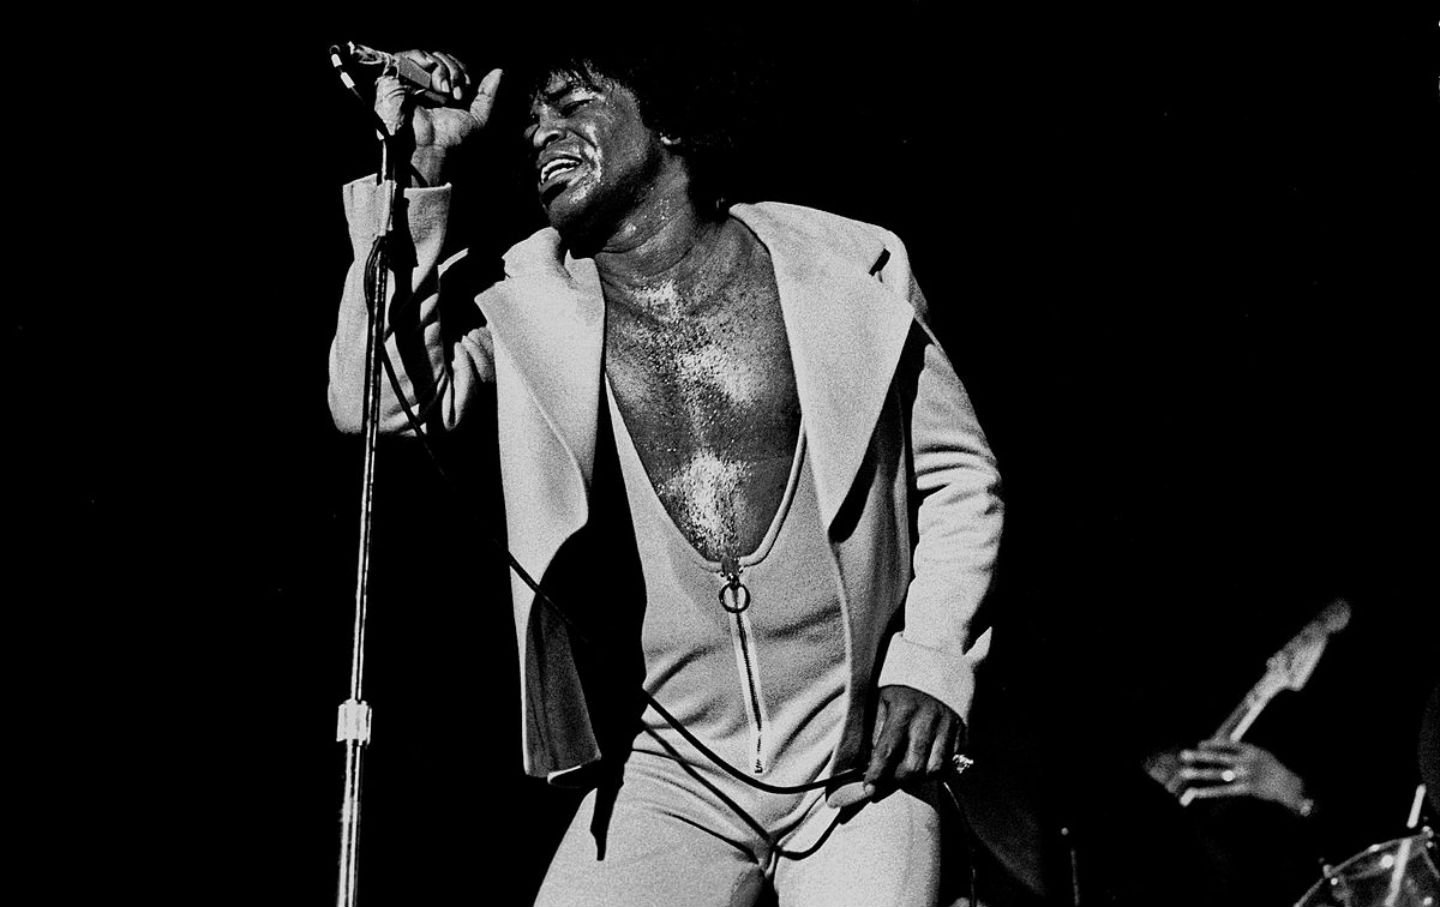 May 3, 1933: James Brown, Godfather of Soul, Is Born